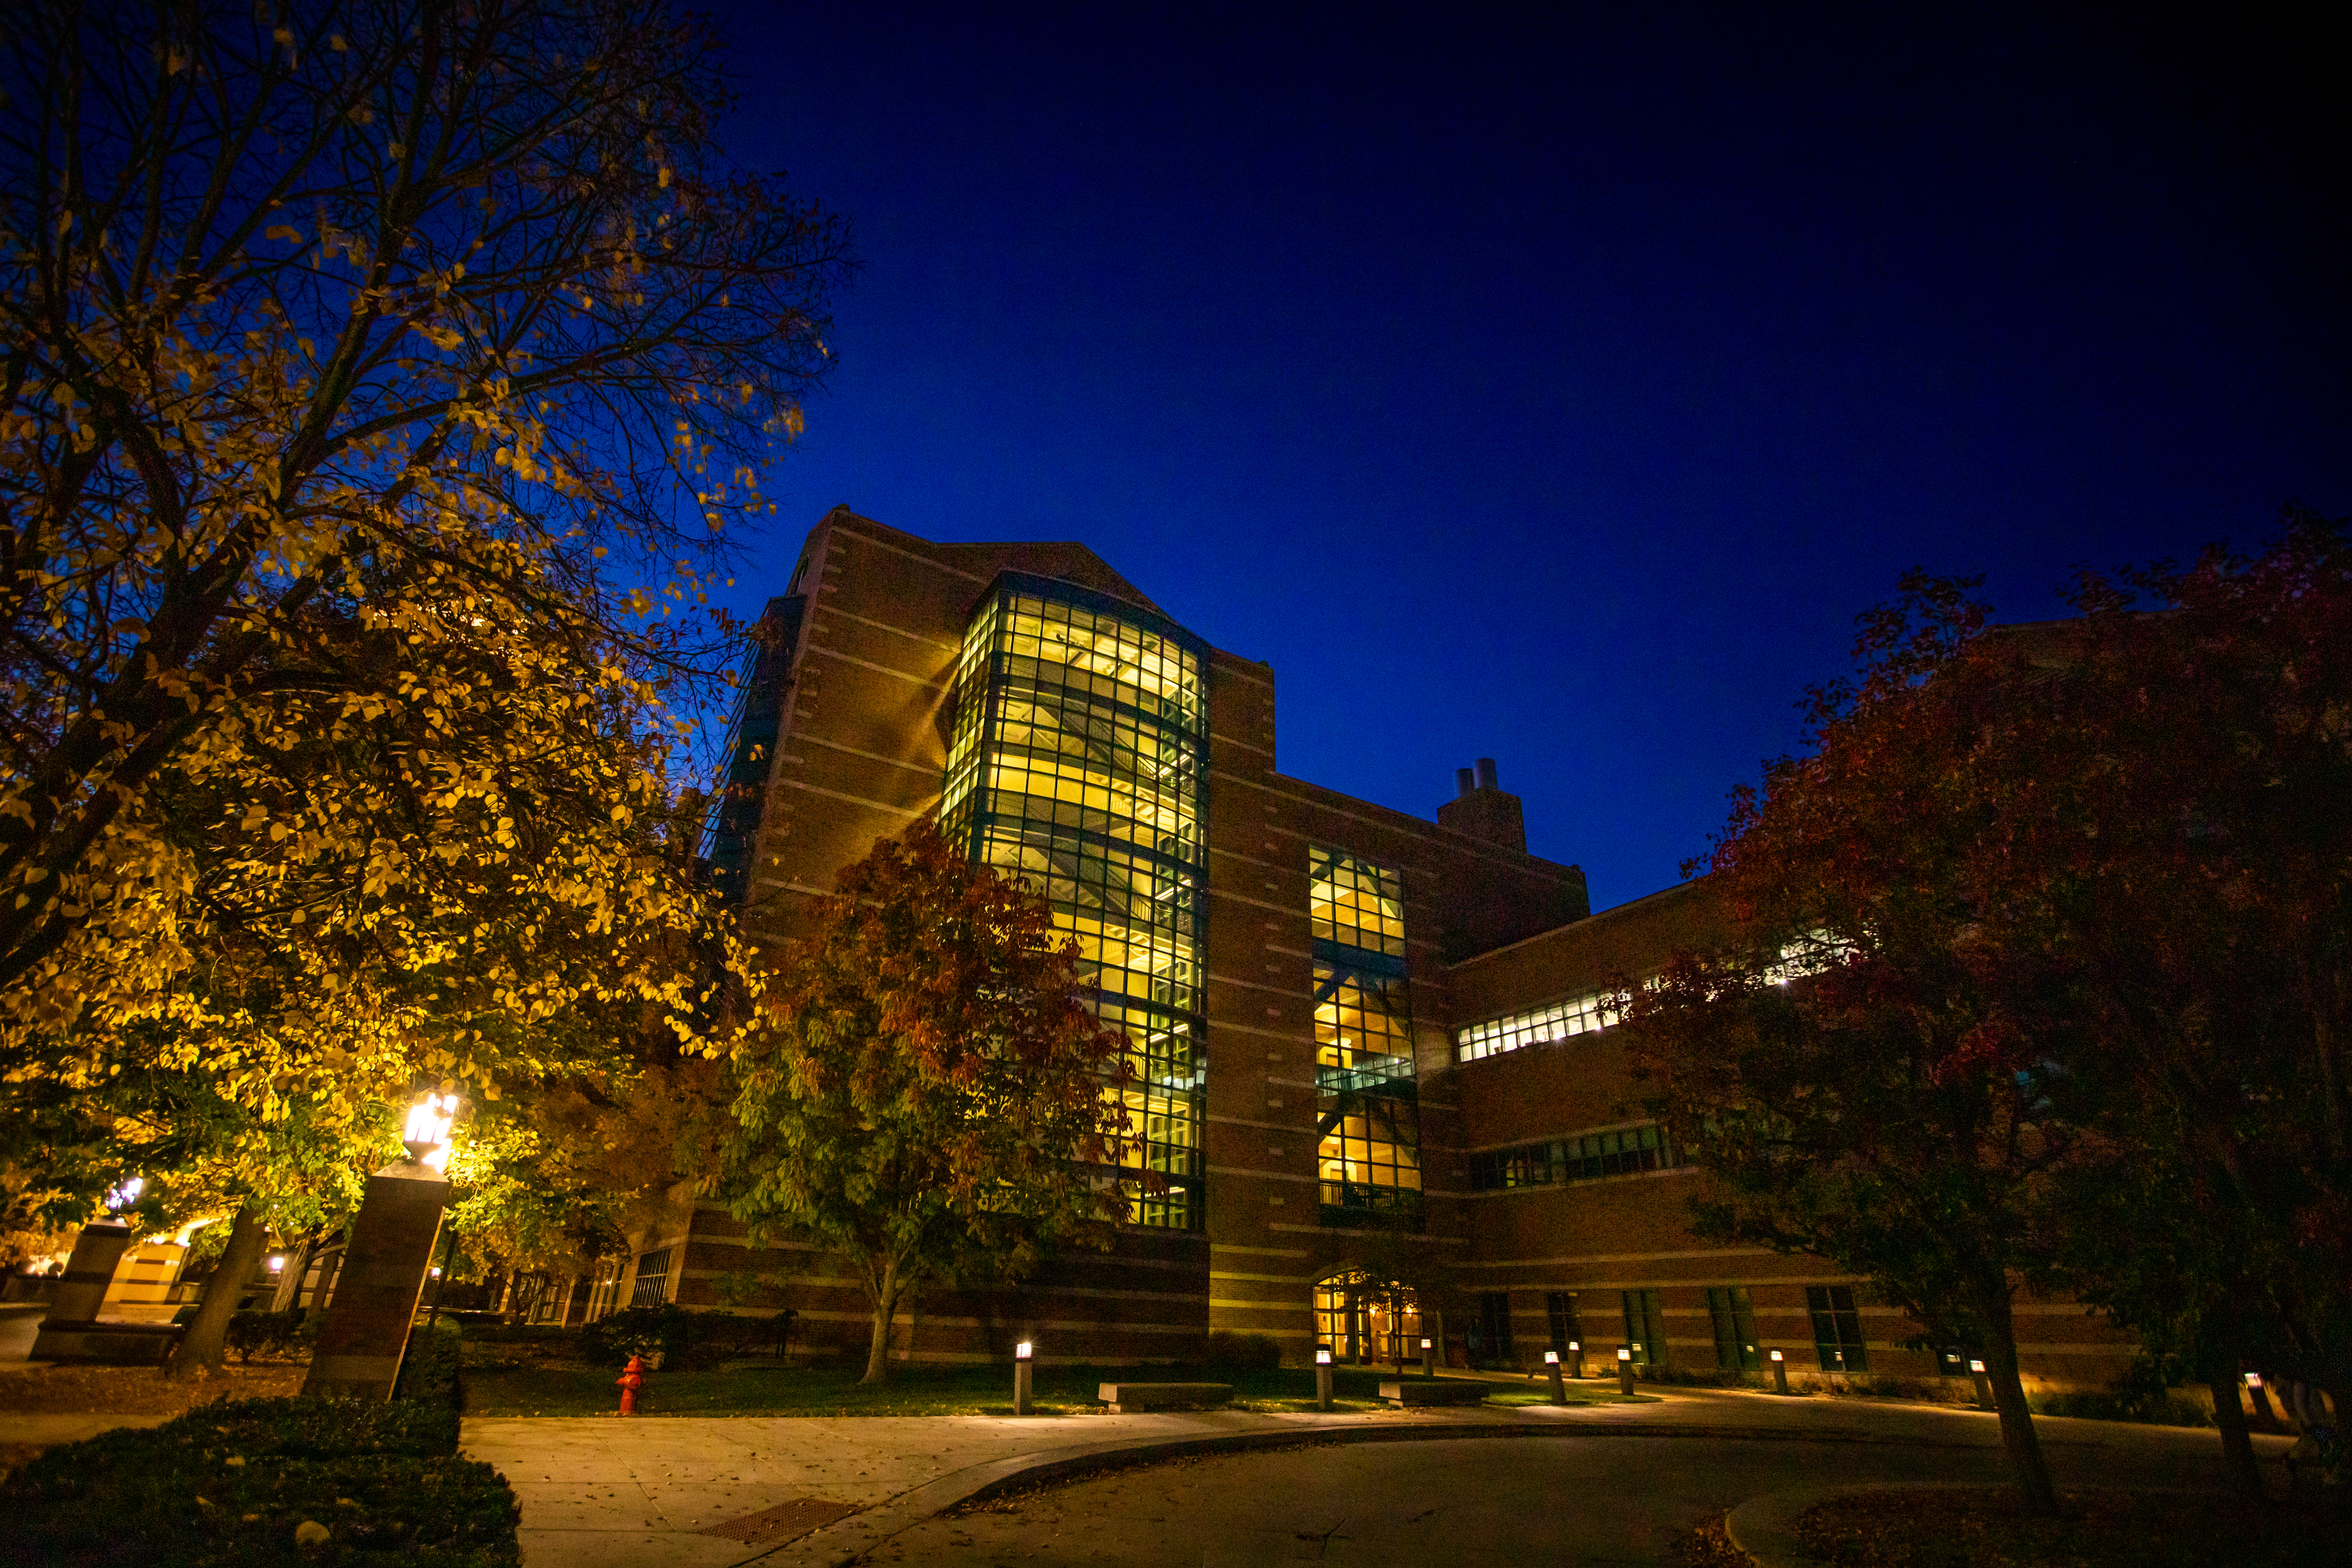 Exterior of Beckman Institute at nighttime. Lights in the building are on and trees along path to the building are illuminated.